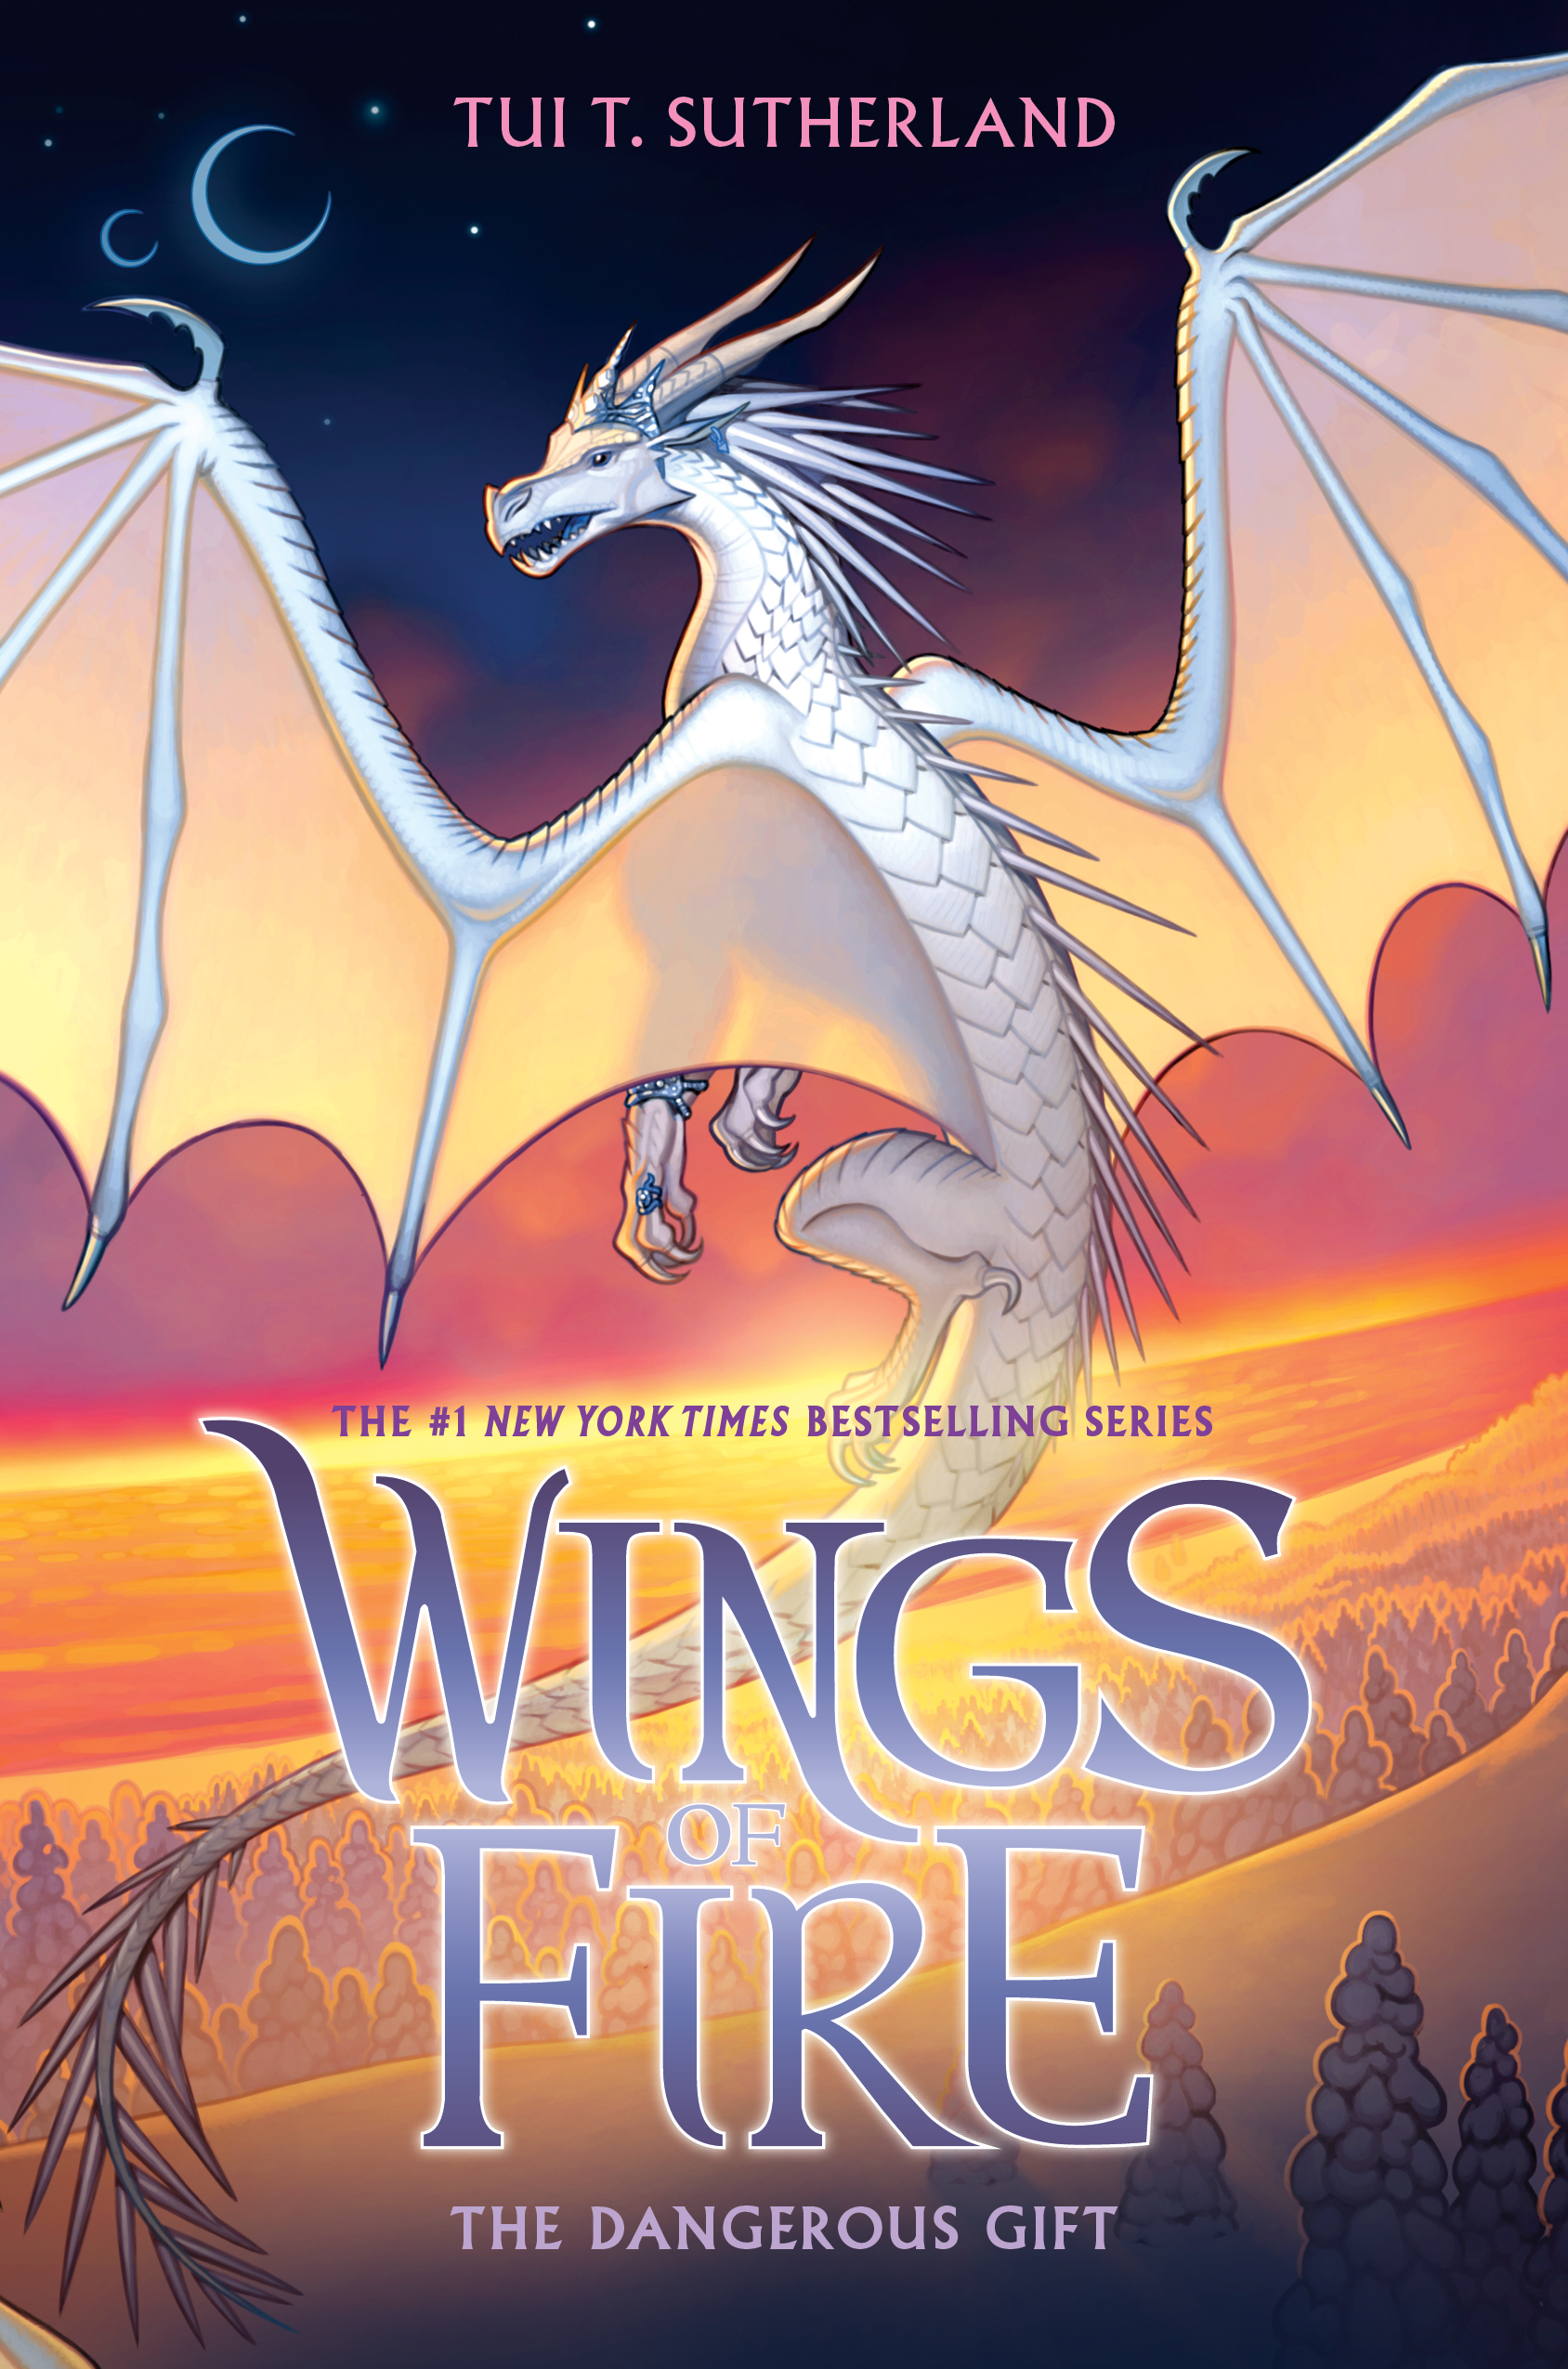 The Dangerous Gift (Wings of Fire, ) by Tui T. Sutherland